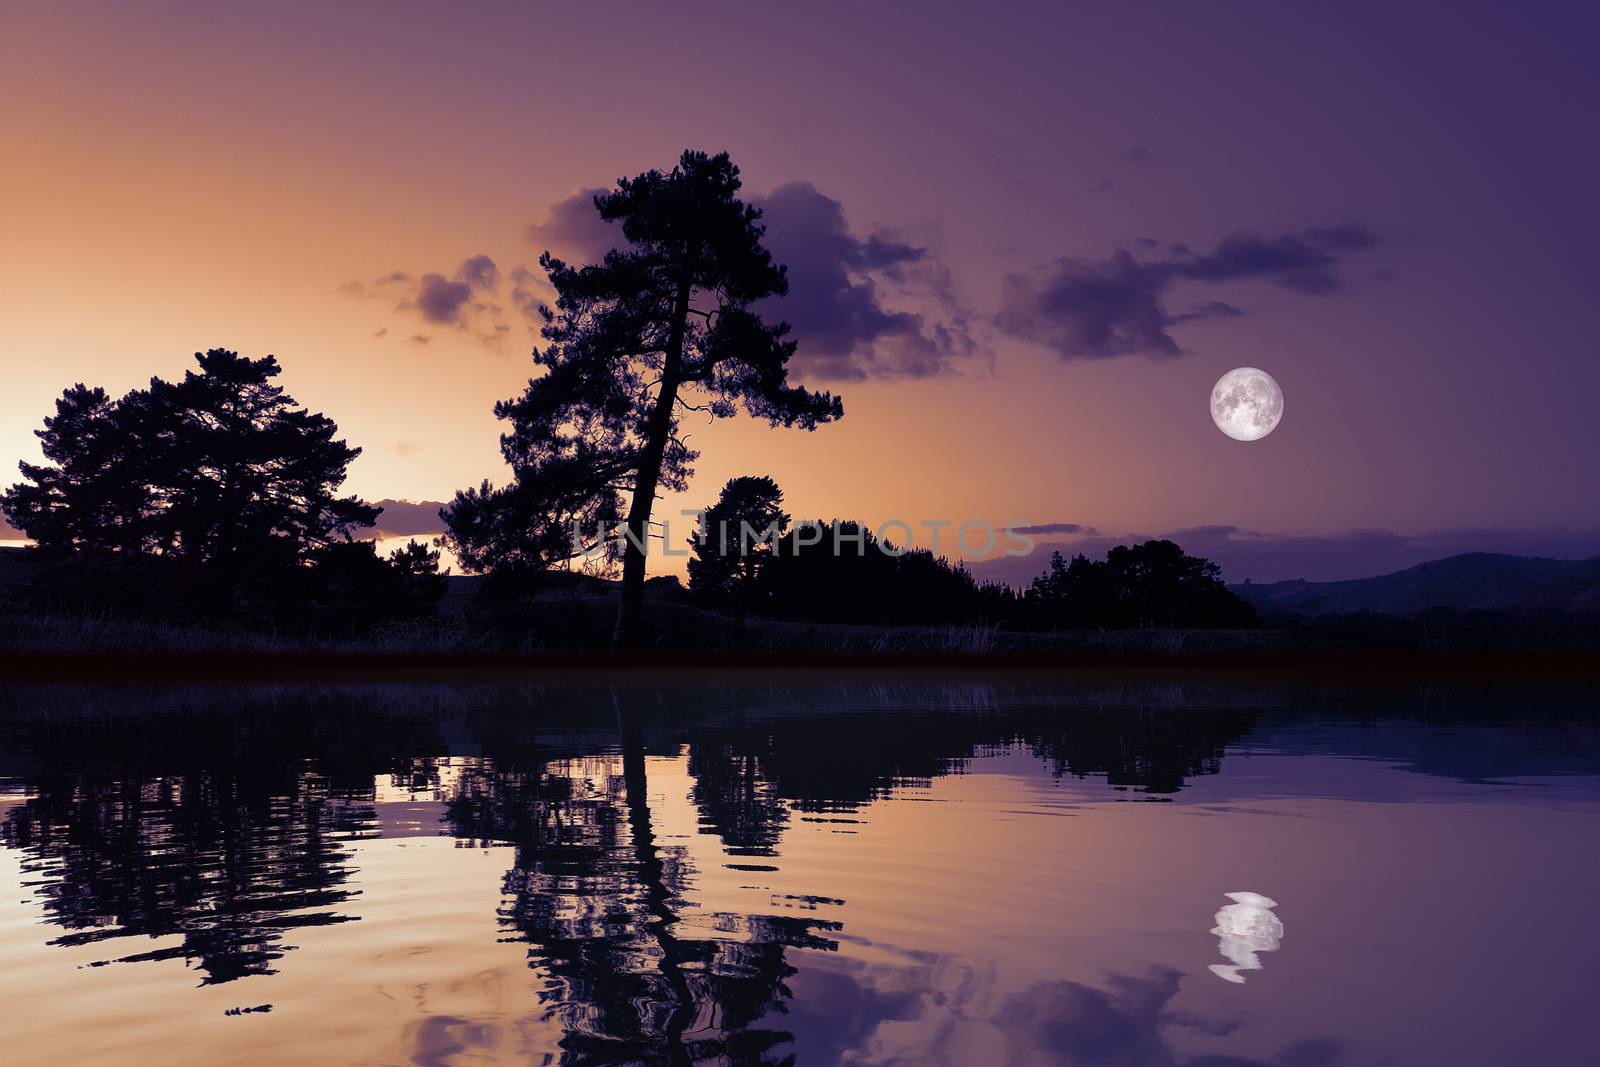 An image of a beautiful moon with lake reflections dark scenery